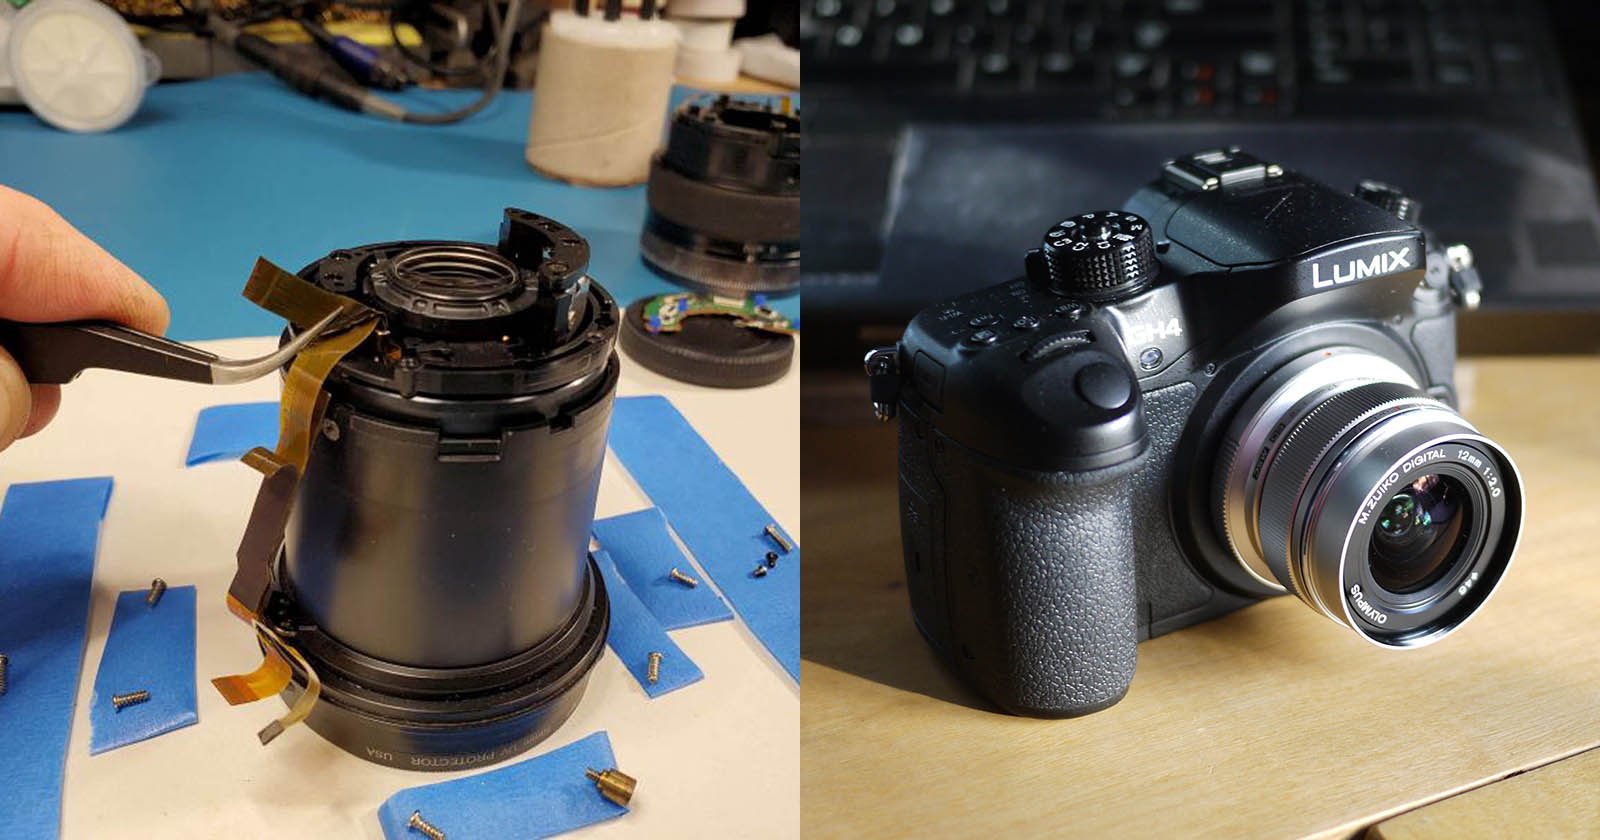 Repairing a Olympus Lens with a Torn PCB, From Start to Finish